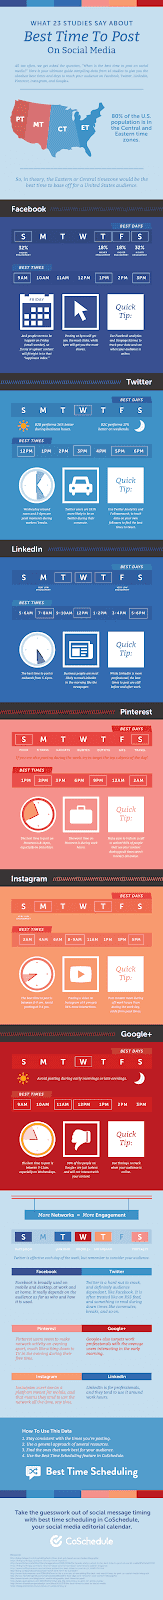 CoSchedule graphic on the best post times for each social media company